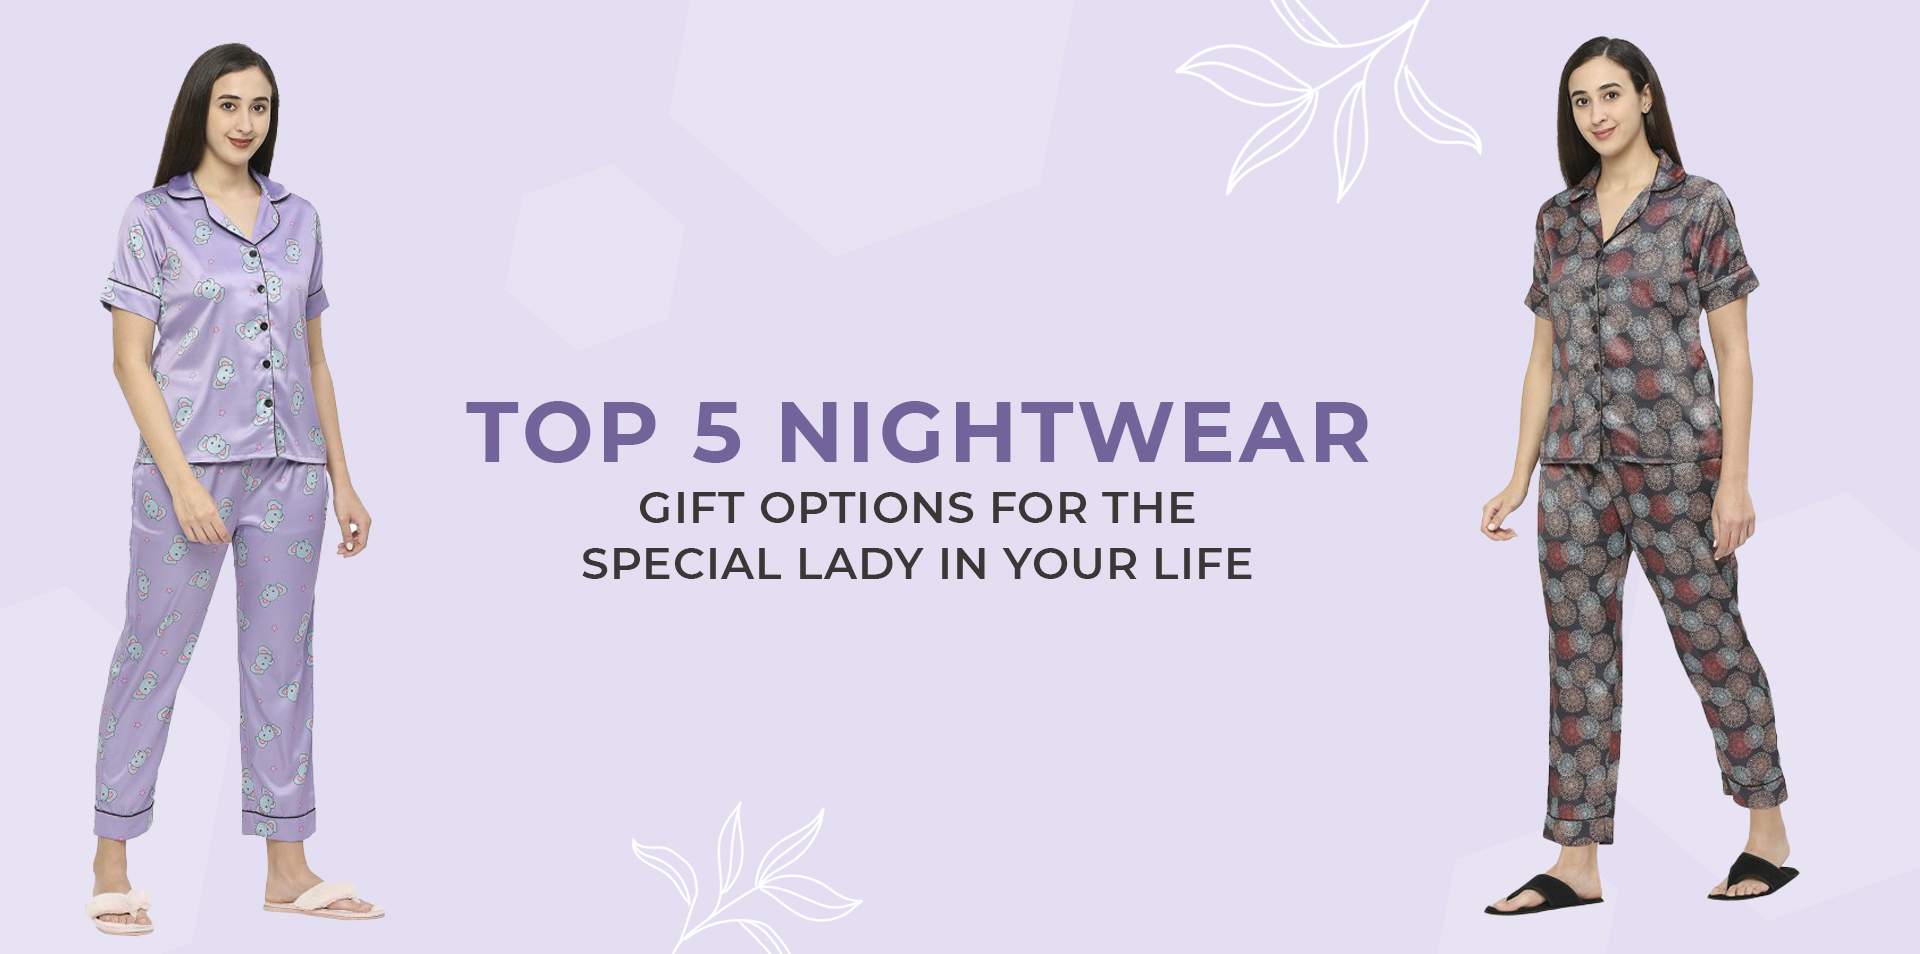 5 Nightwear Gift Options for your Special Lady by smarty pants